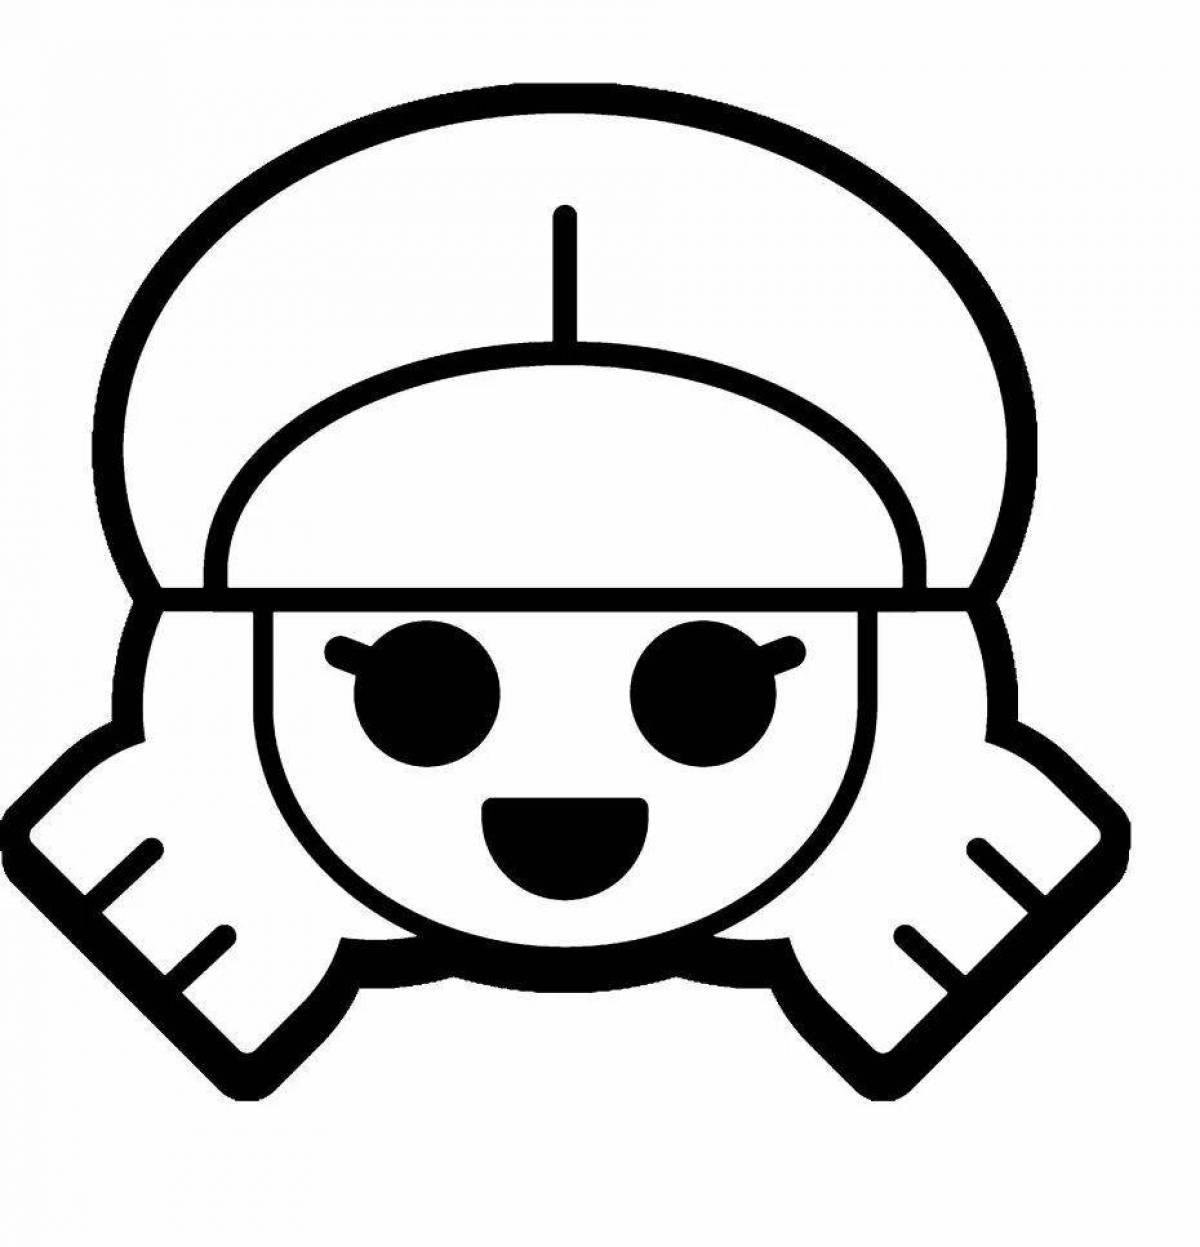 Intriguing coloring icons from brawl stars